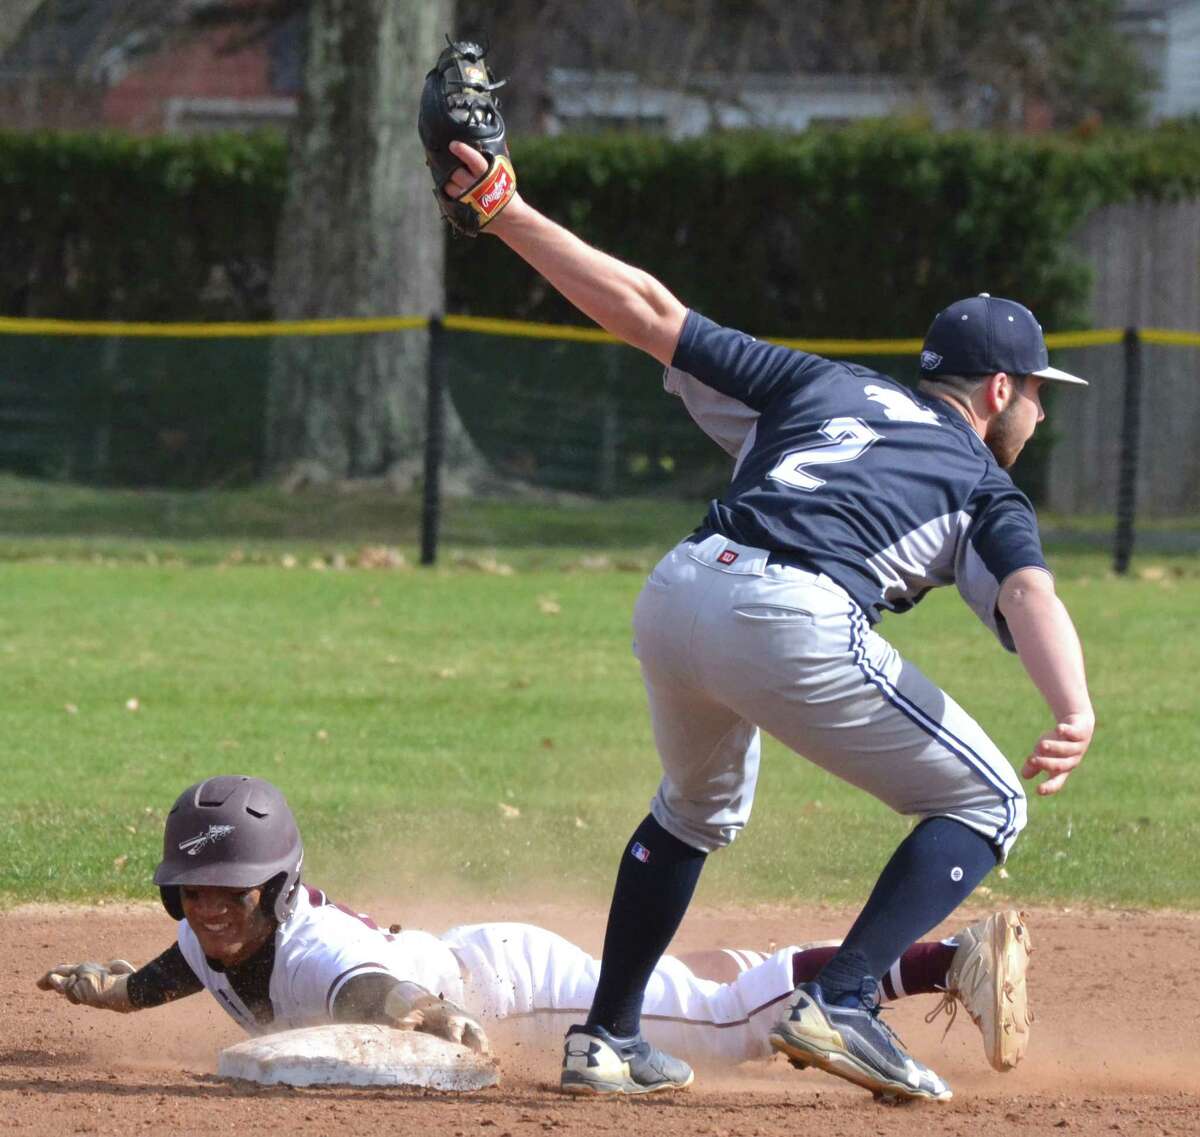 Wethersfield’s Tyler Note tags out Windsor’s Marcus Massa trying to steal second base on Wednesday, April 18, 2018. (Pete Paguaga, Hearst Media Group)